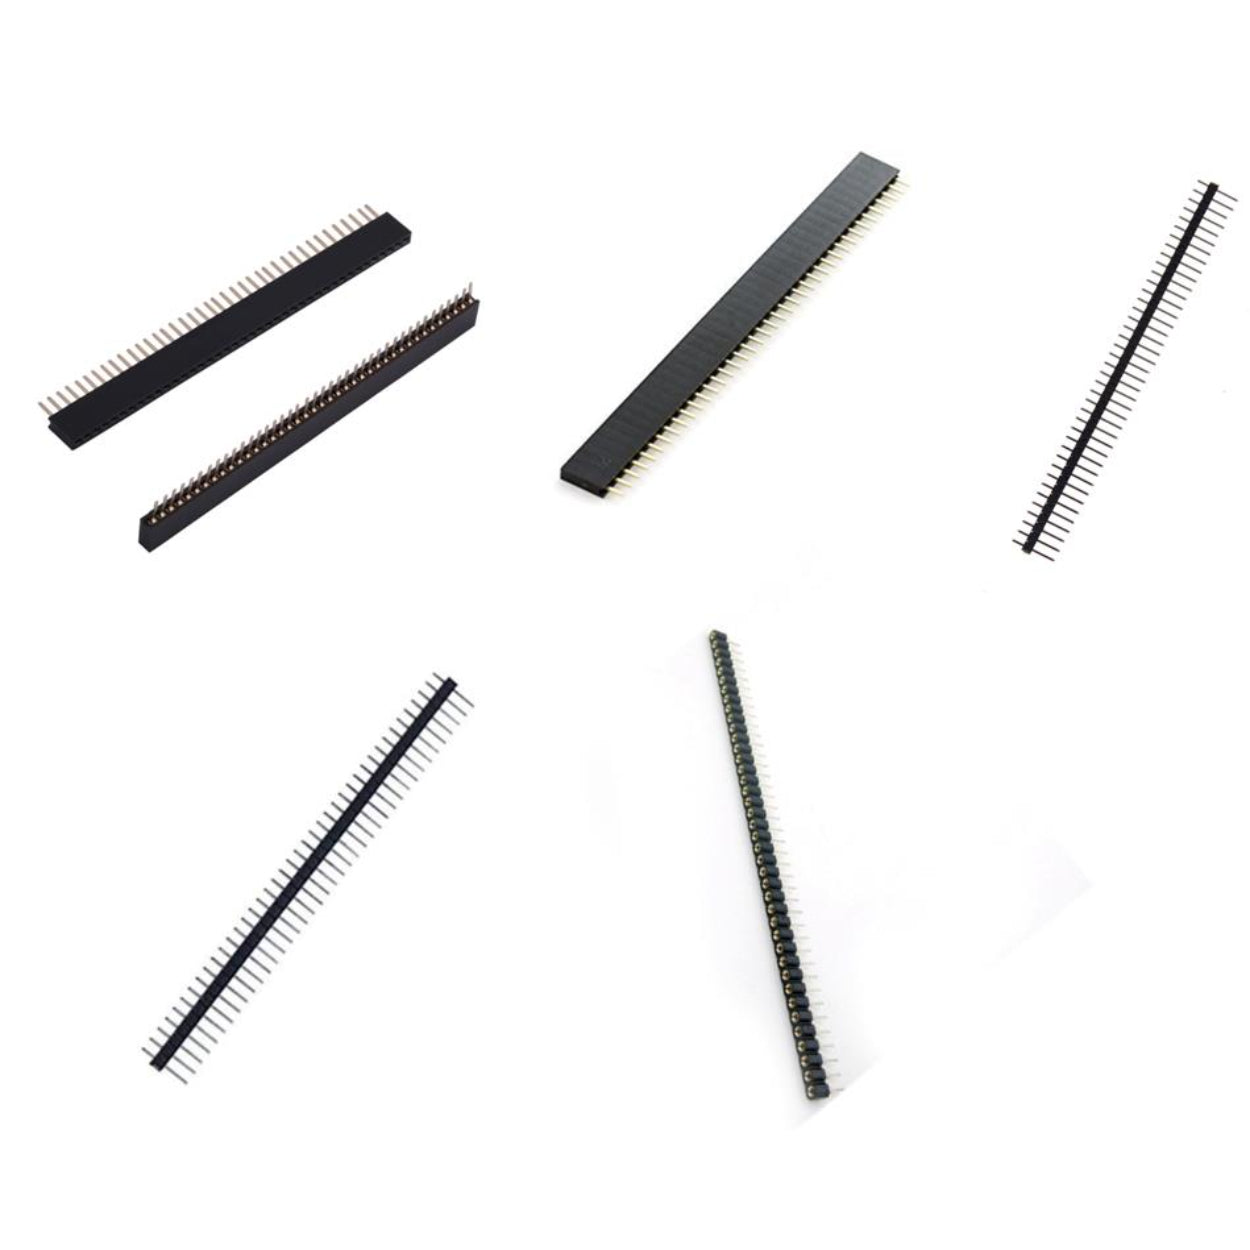 40 Pin Berg Strip Male Type Female Squre HoleType Female Rounded Hole Type  pins spaced at 2.54mm